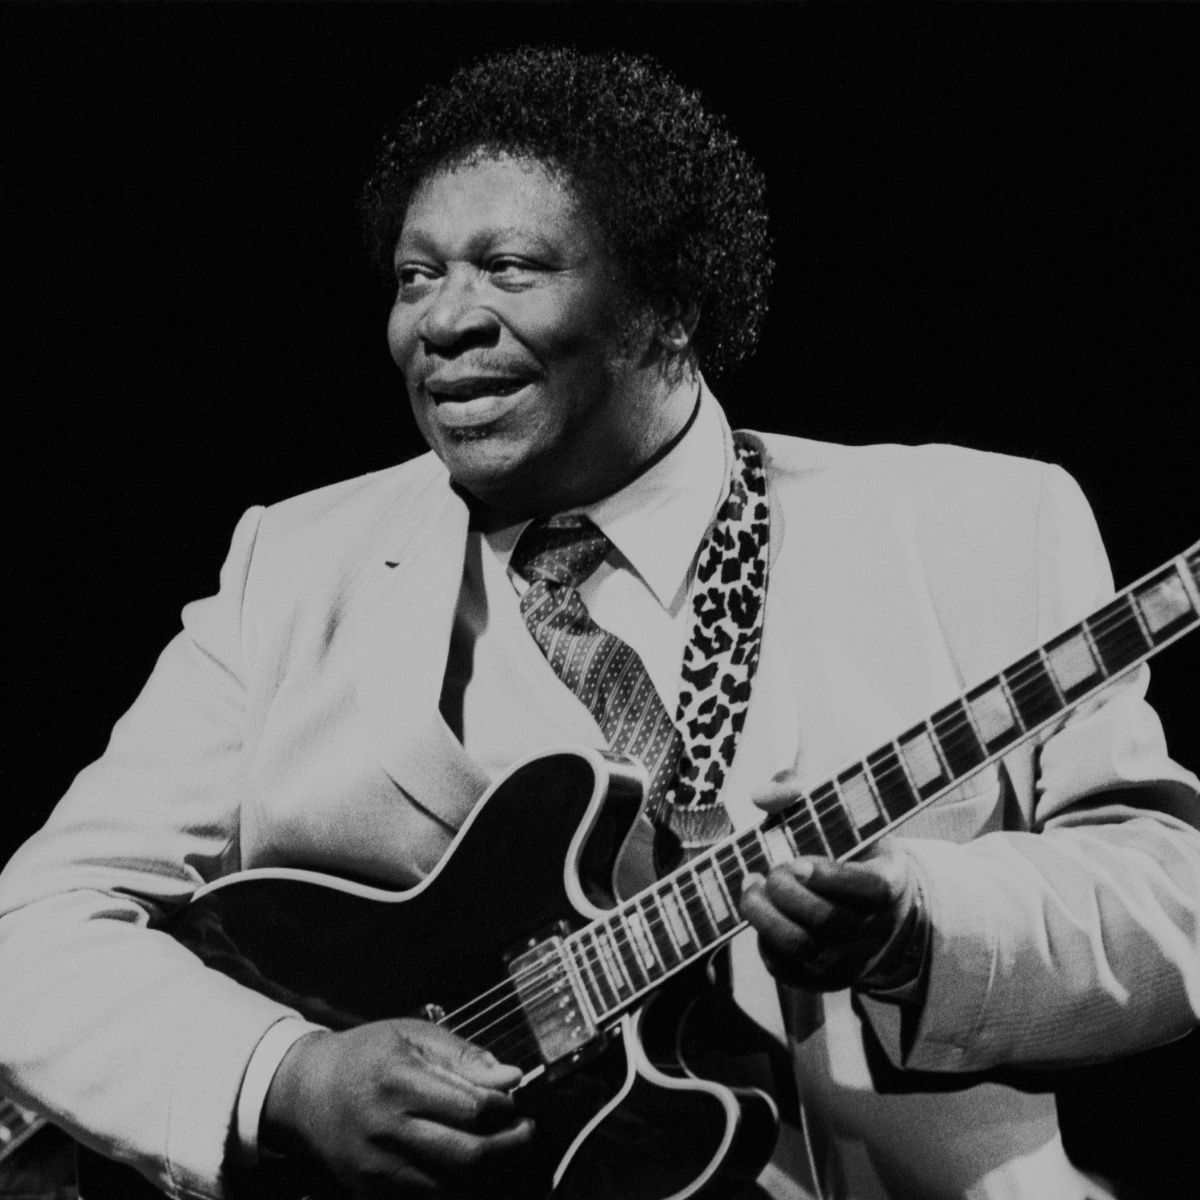 BB King (BBC King) in his youth